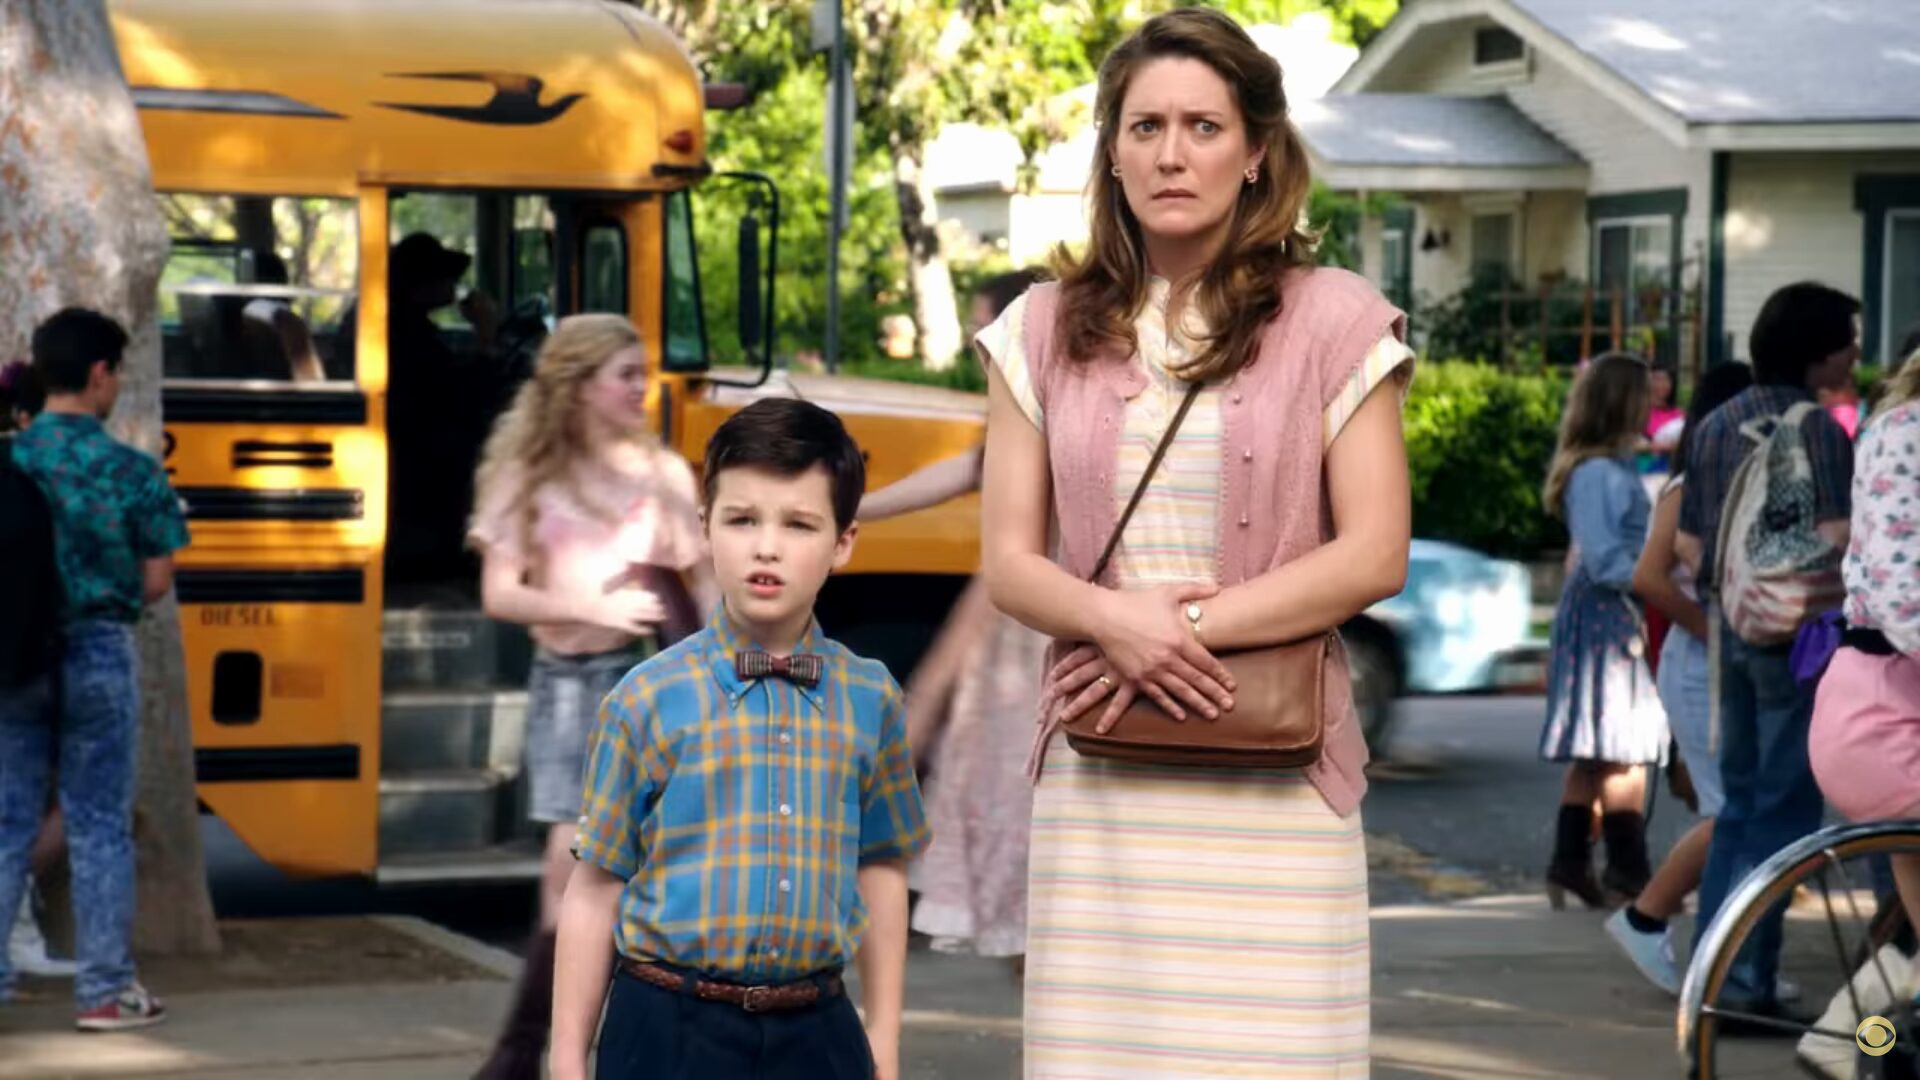 Here’s The Trailer For “Young Sheldon” The Big Bang Theory Spinoff